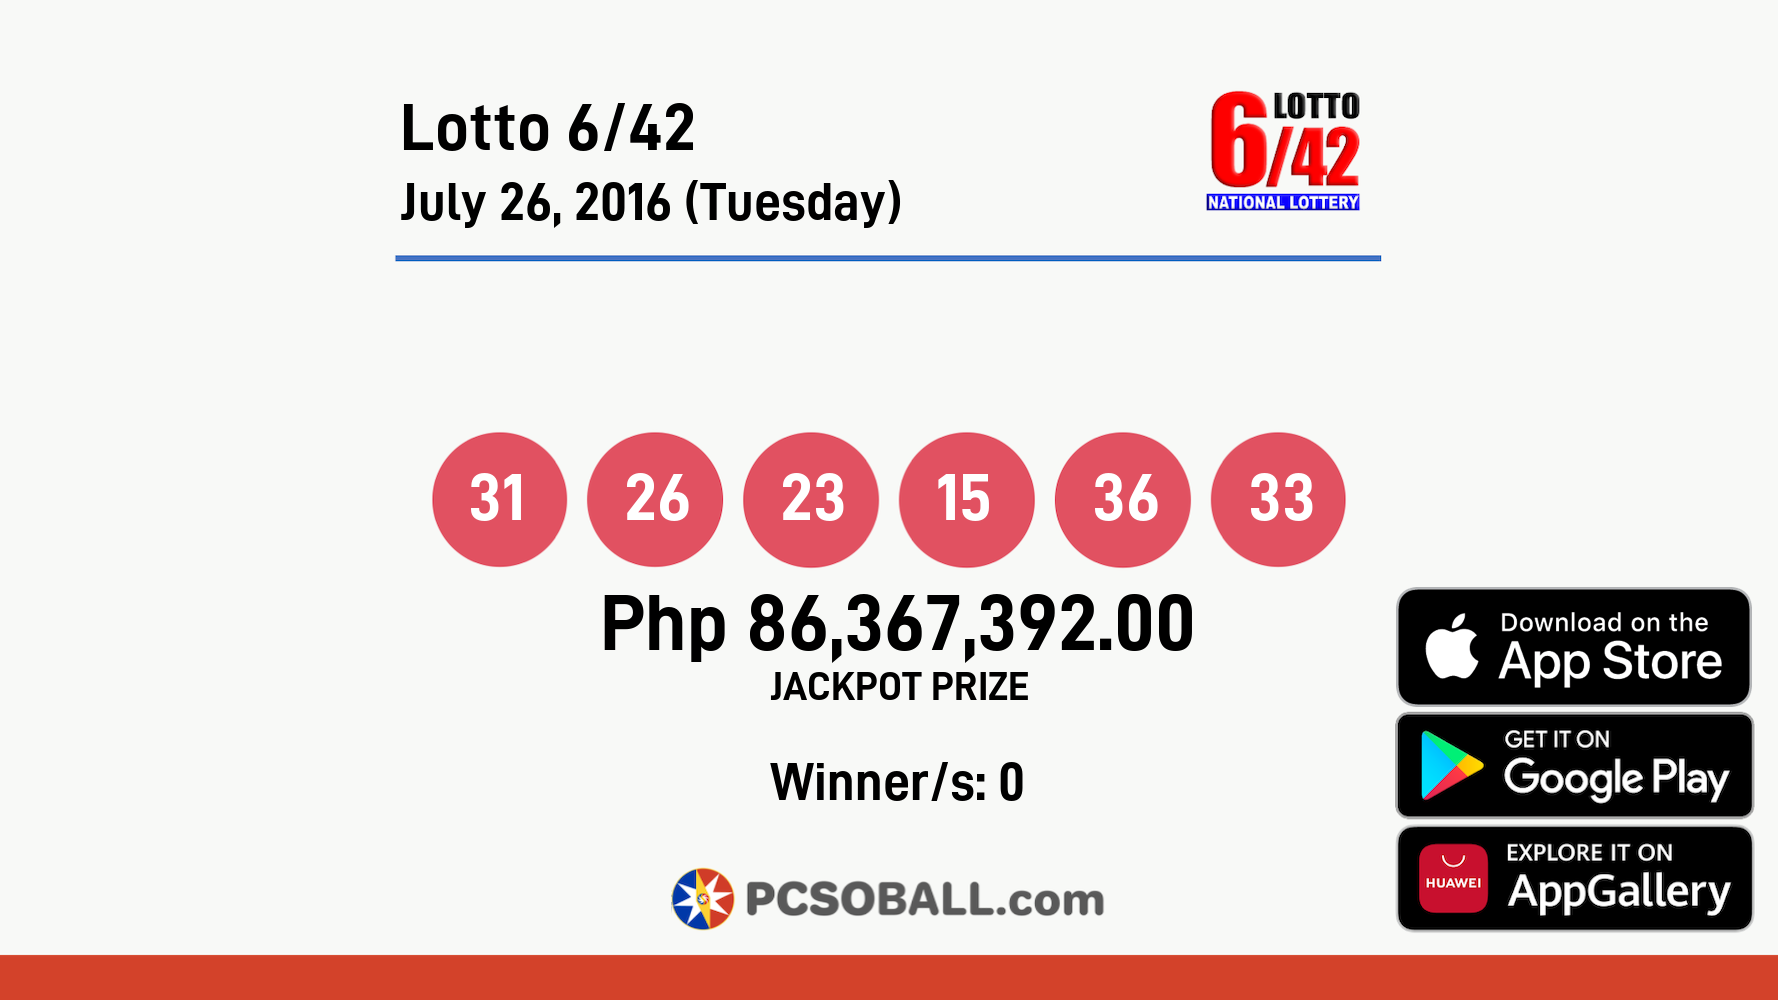 Lotto 6/42 July 26, 2016 (Tuesday) Result